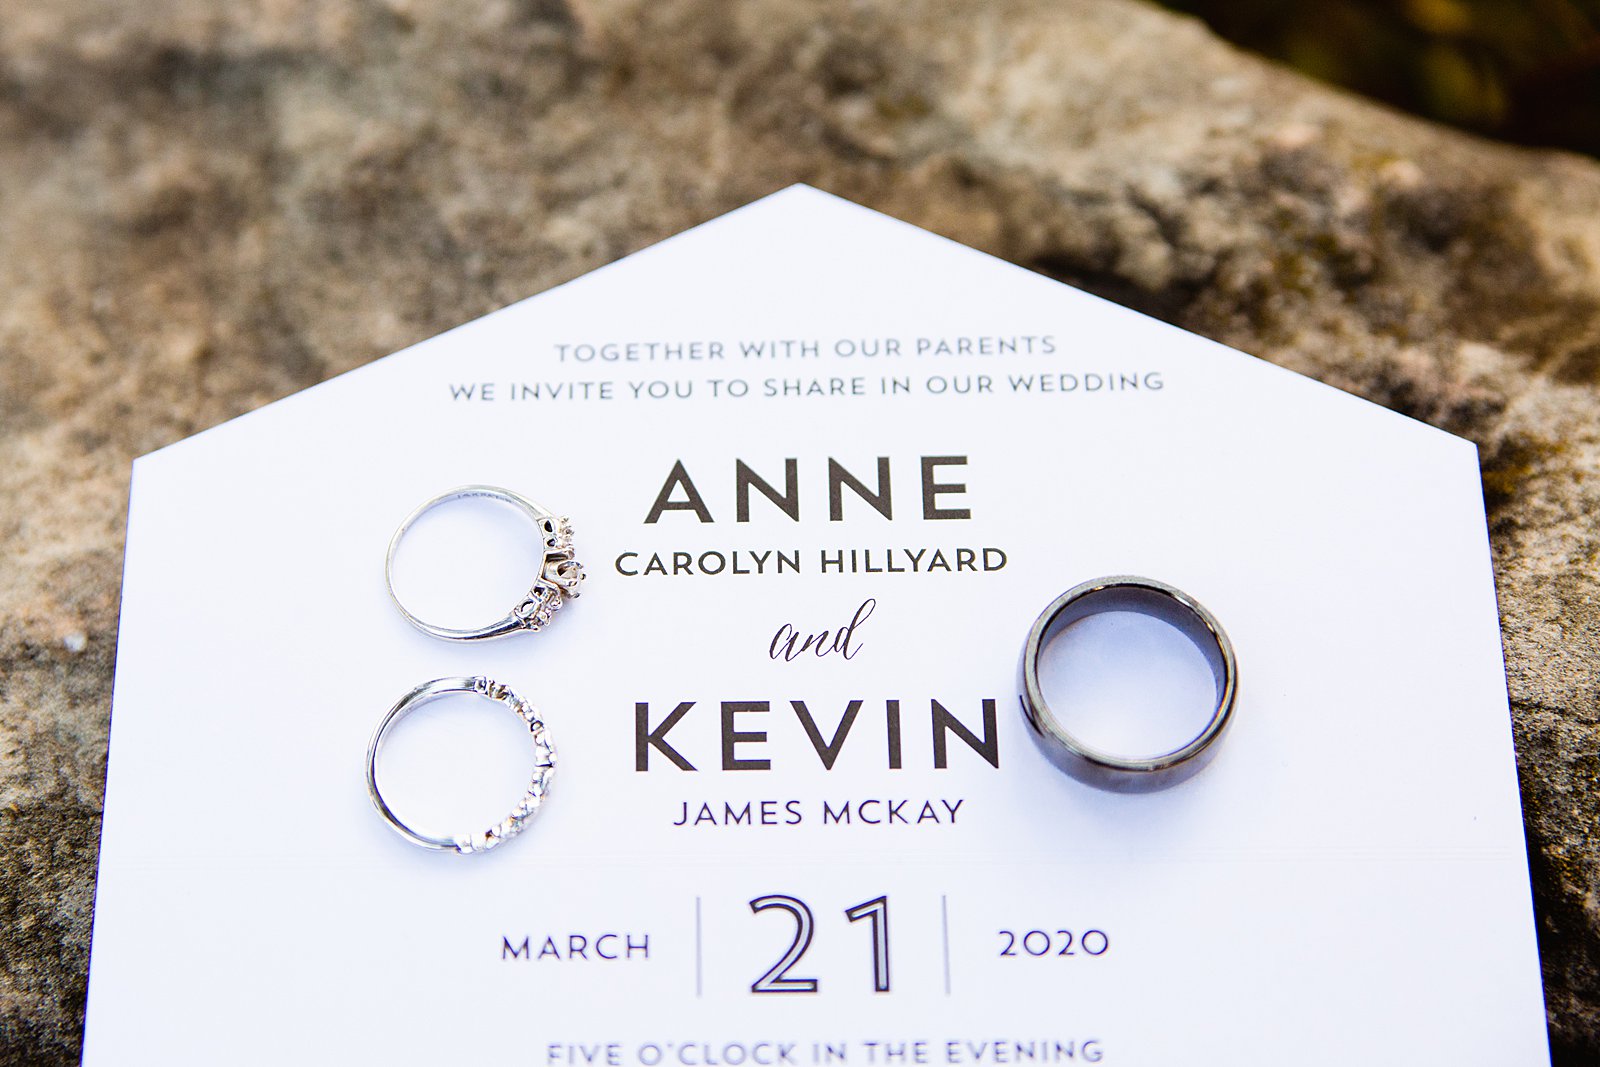 Bride and groom's wedding rings on their wedding invitations by PMA Photography.